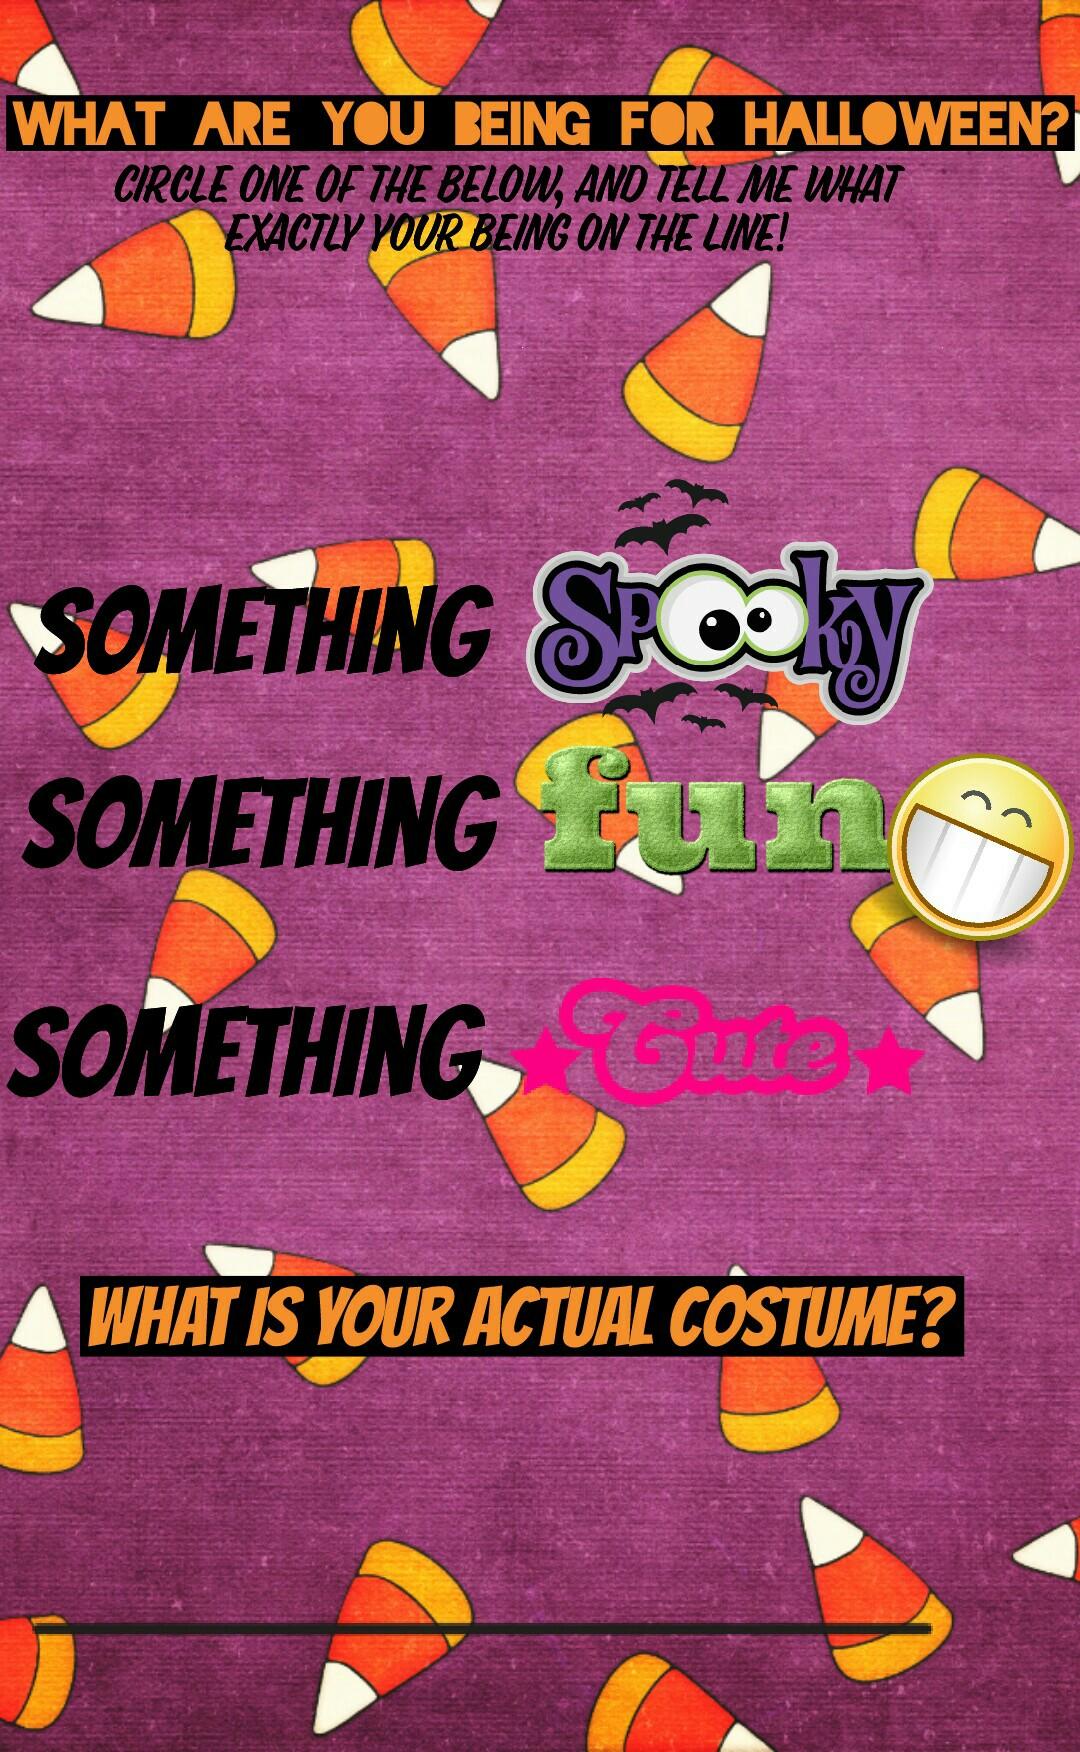 What are you being for Halloween?